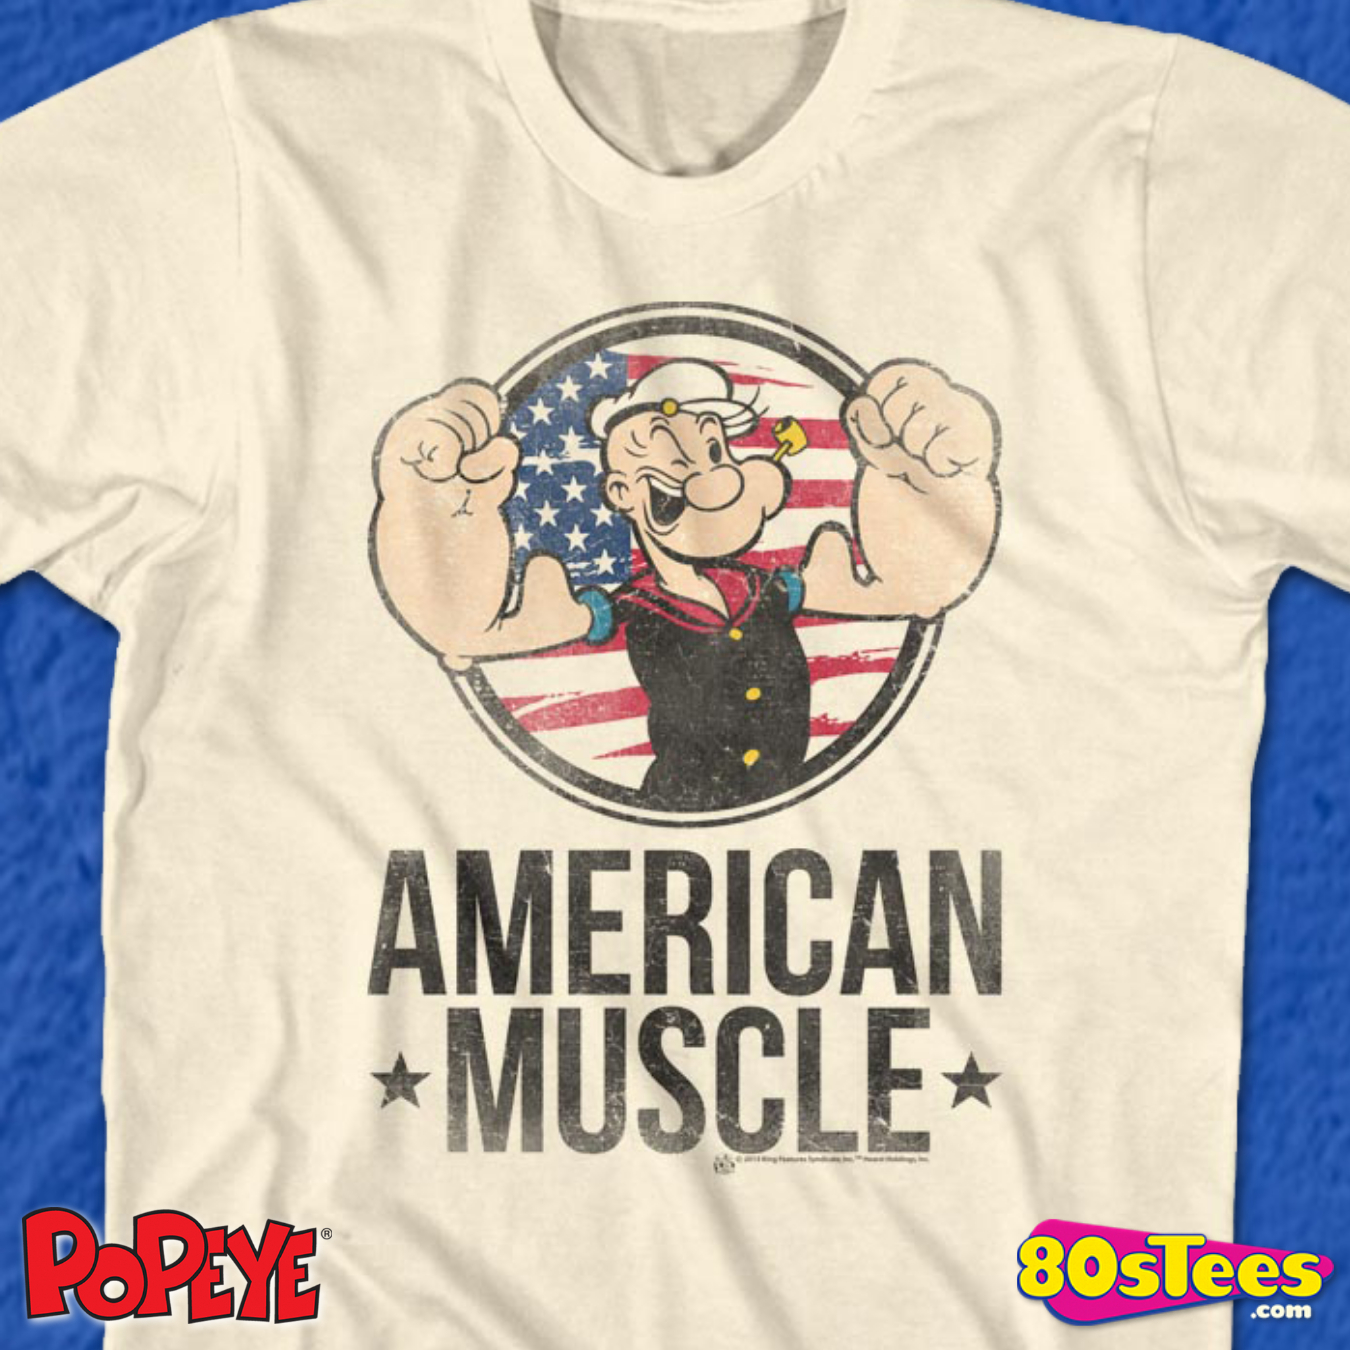 Popeye the Sailorman Best POPS Ever Men's T Shirt Fathers Day Cartoon Muscles 